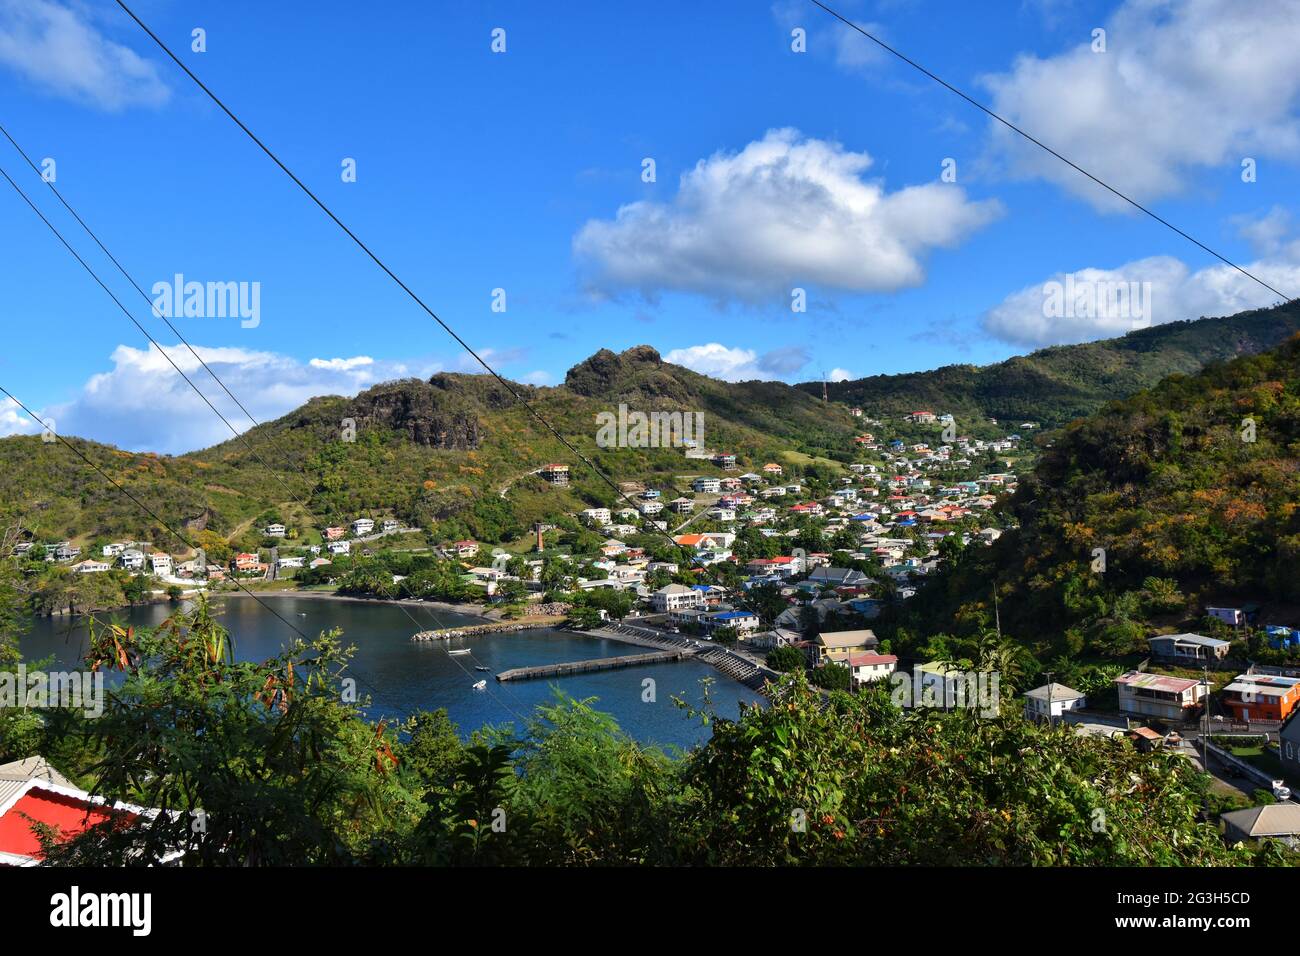 Saint vincent and the grenadines -Fotos und -Bildmaterial in hoher ...